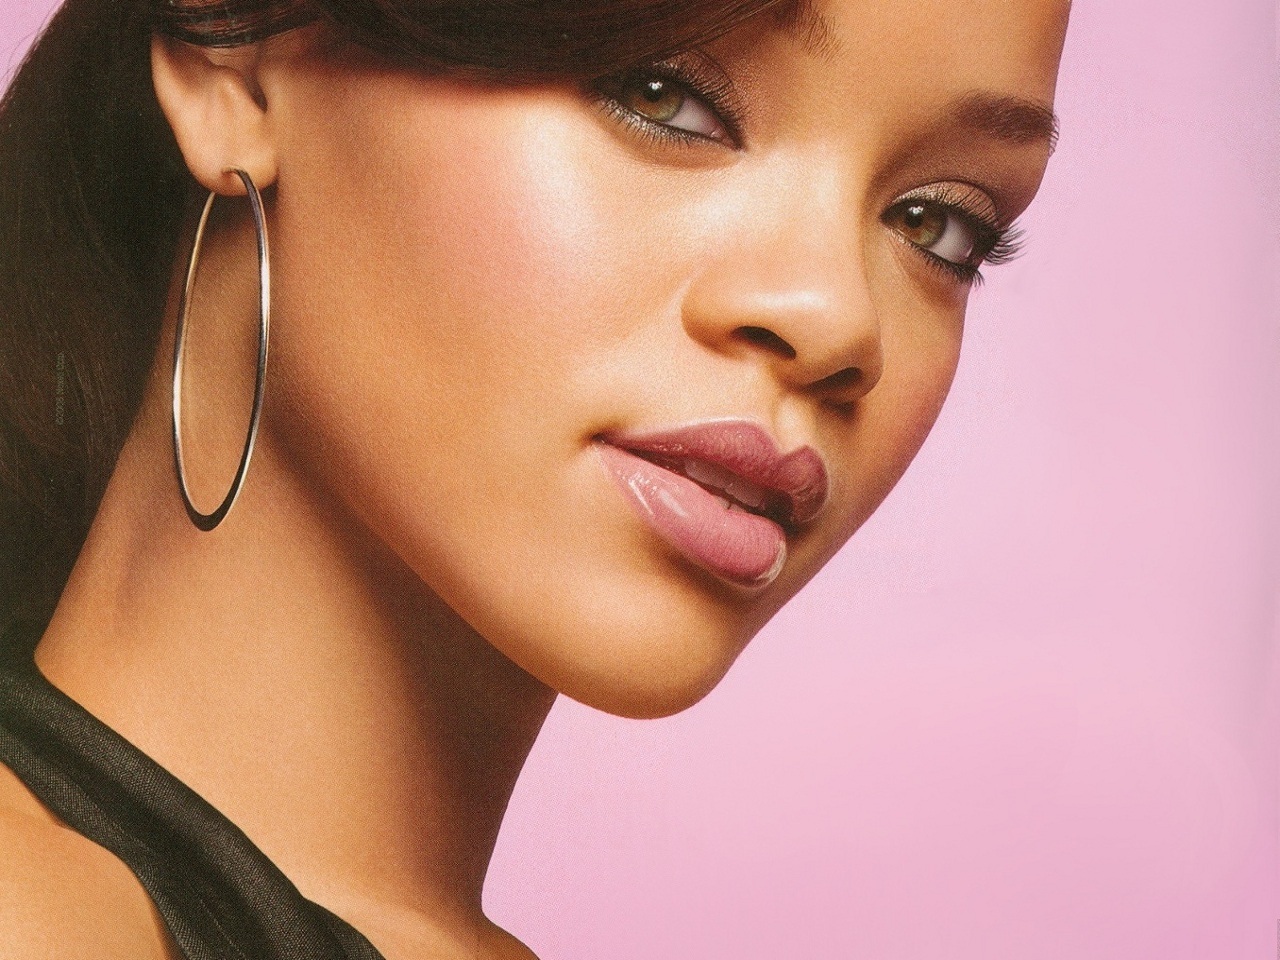 Rihanna Covergirl Lashes Photo Shared By May19 Fans